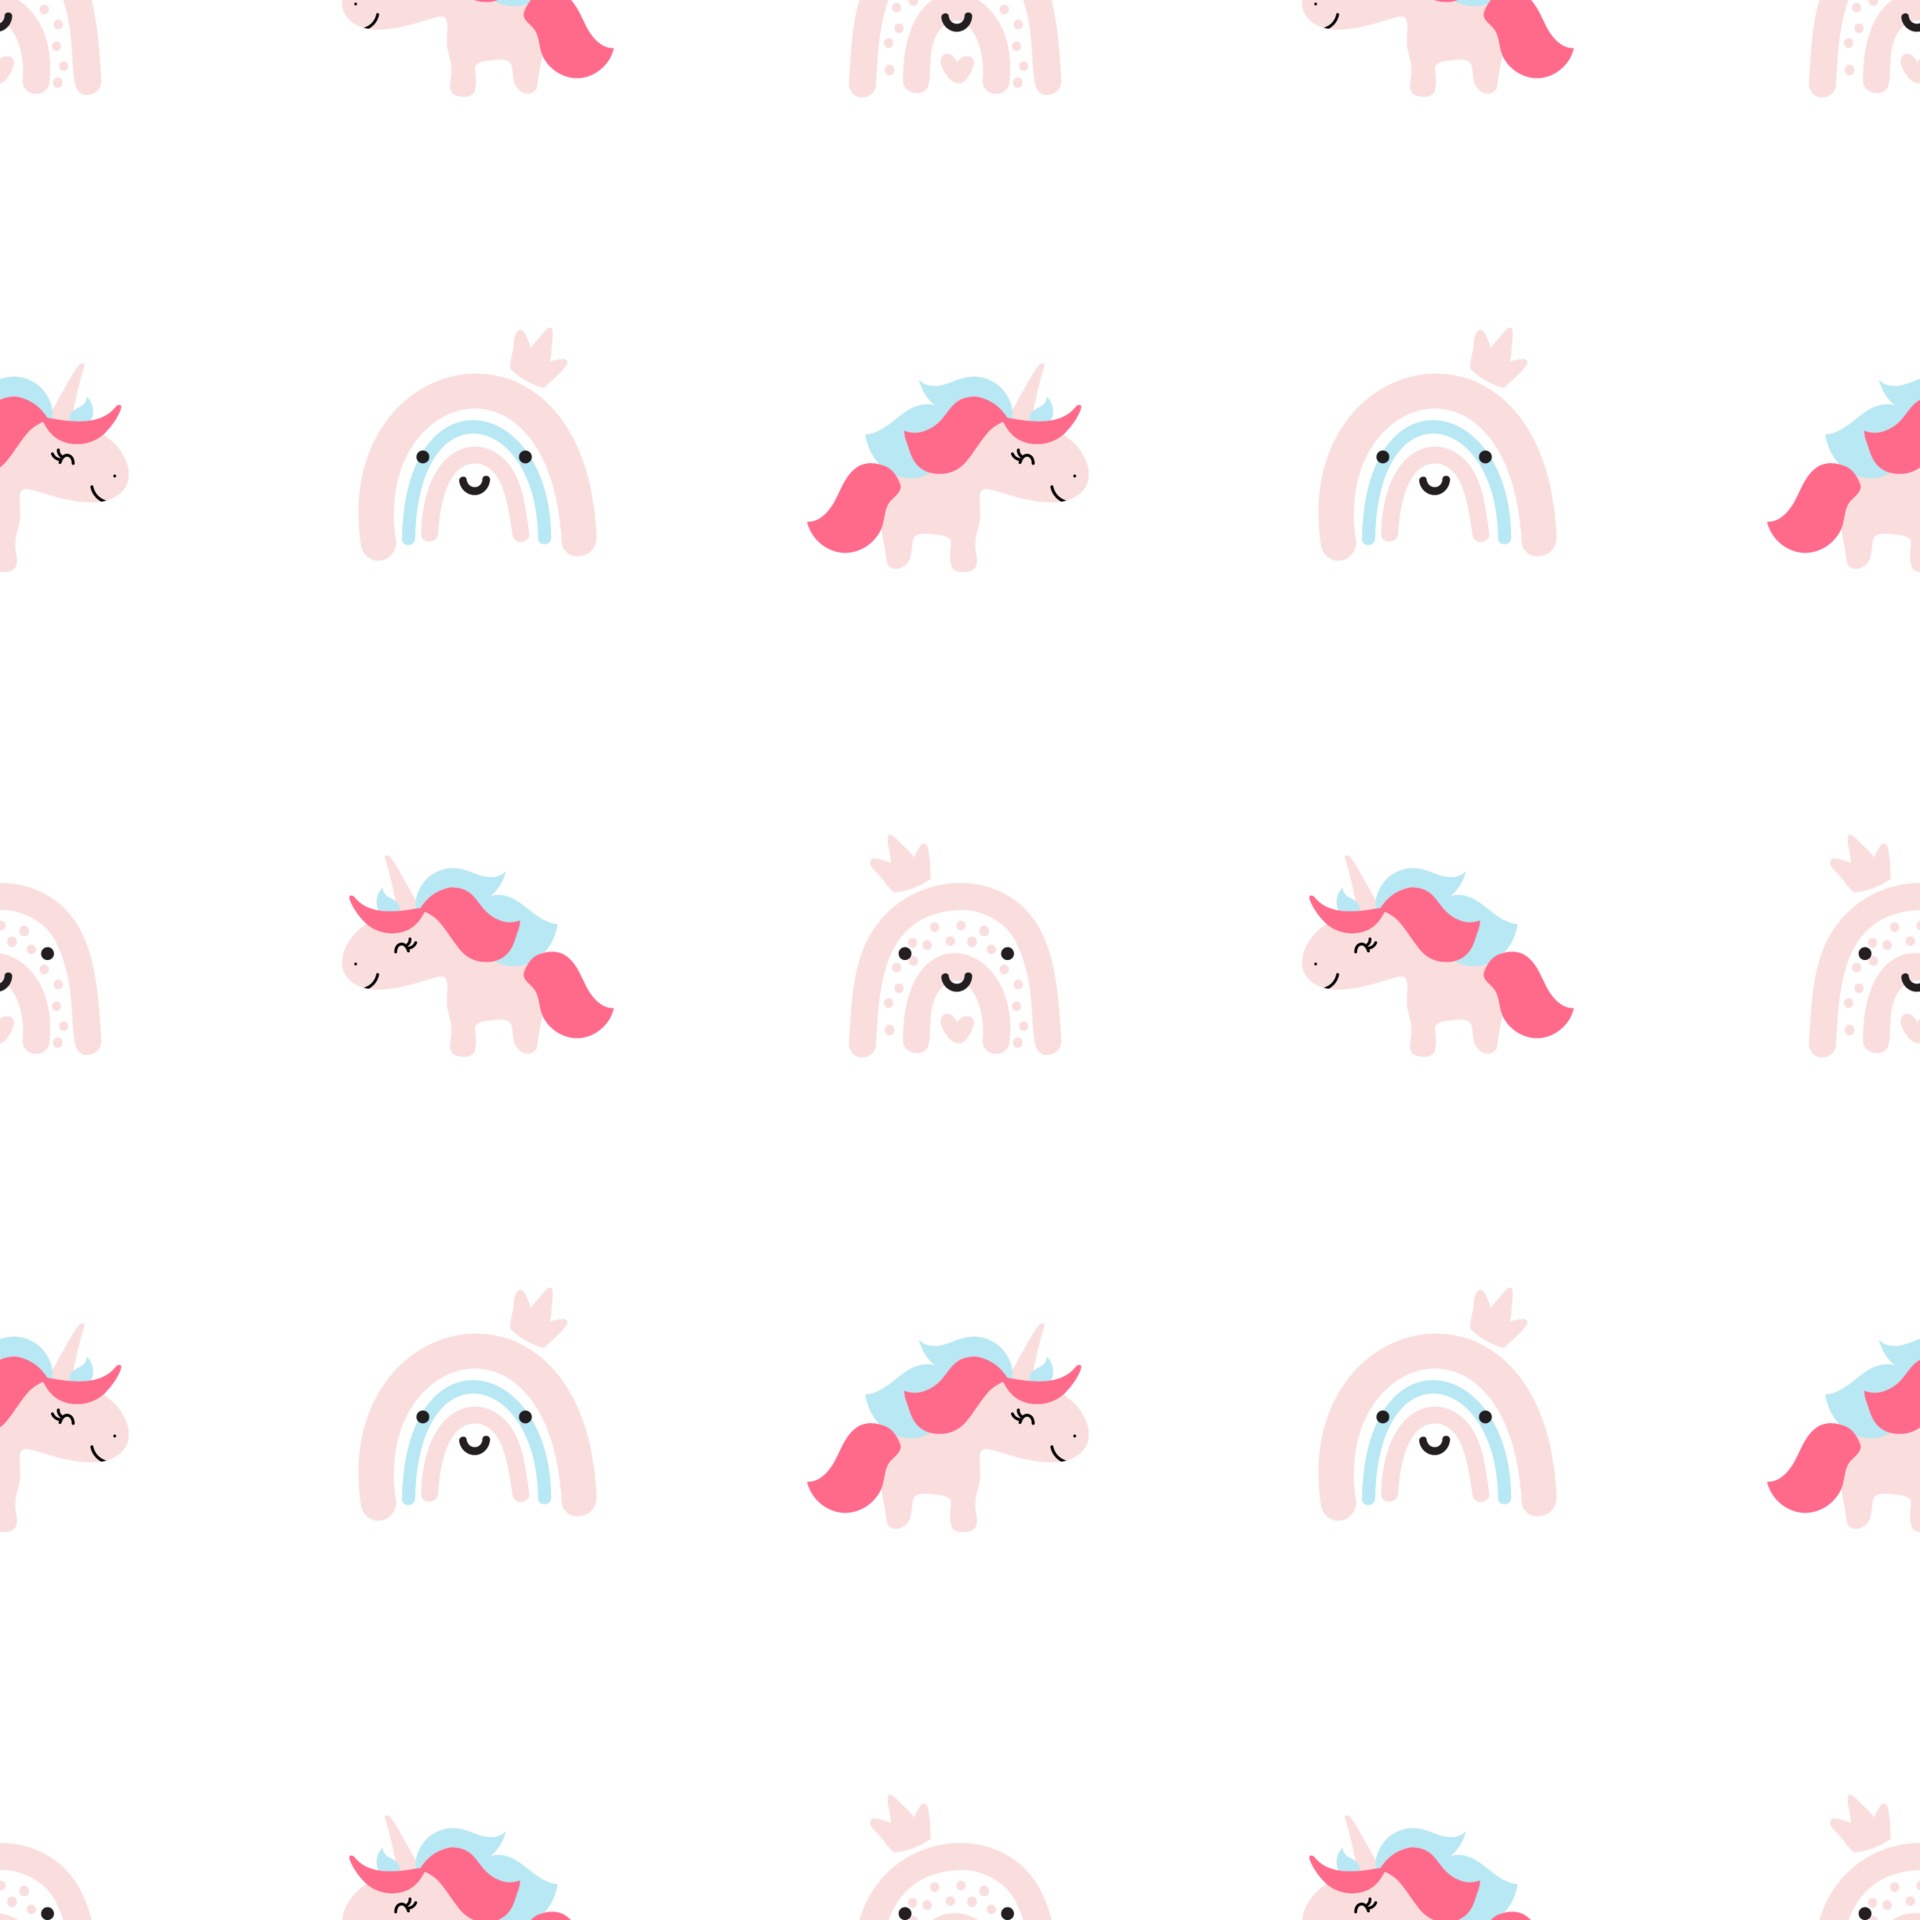 Cute cartoon unicorn seamless baby vector pattern background illustration with pastel flowers. Children texture for kids wallpaper, fills, web page background